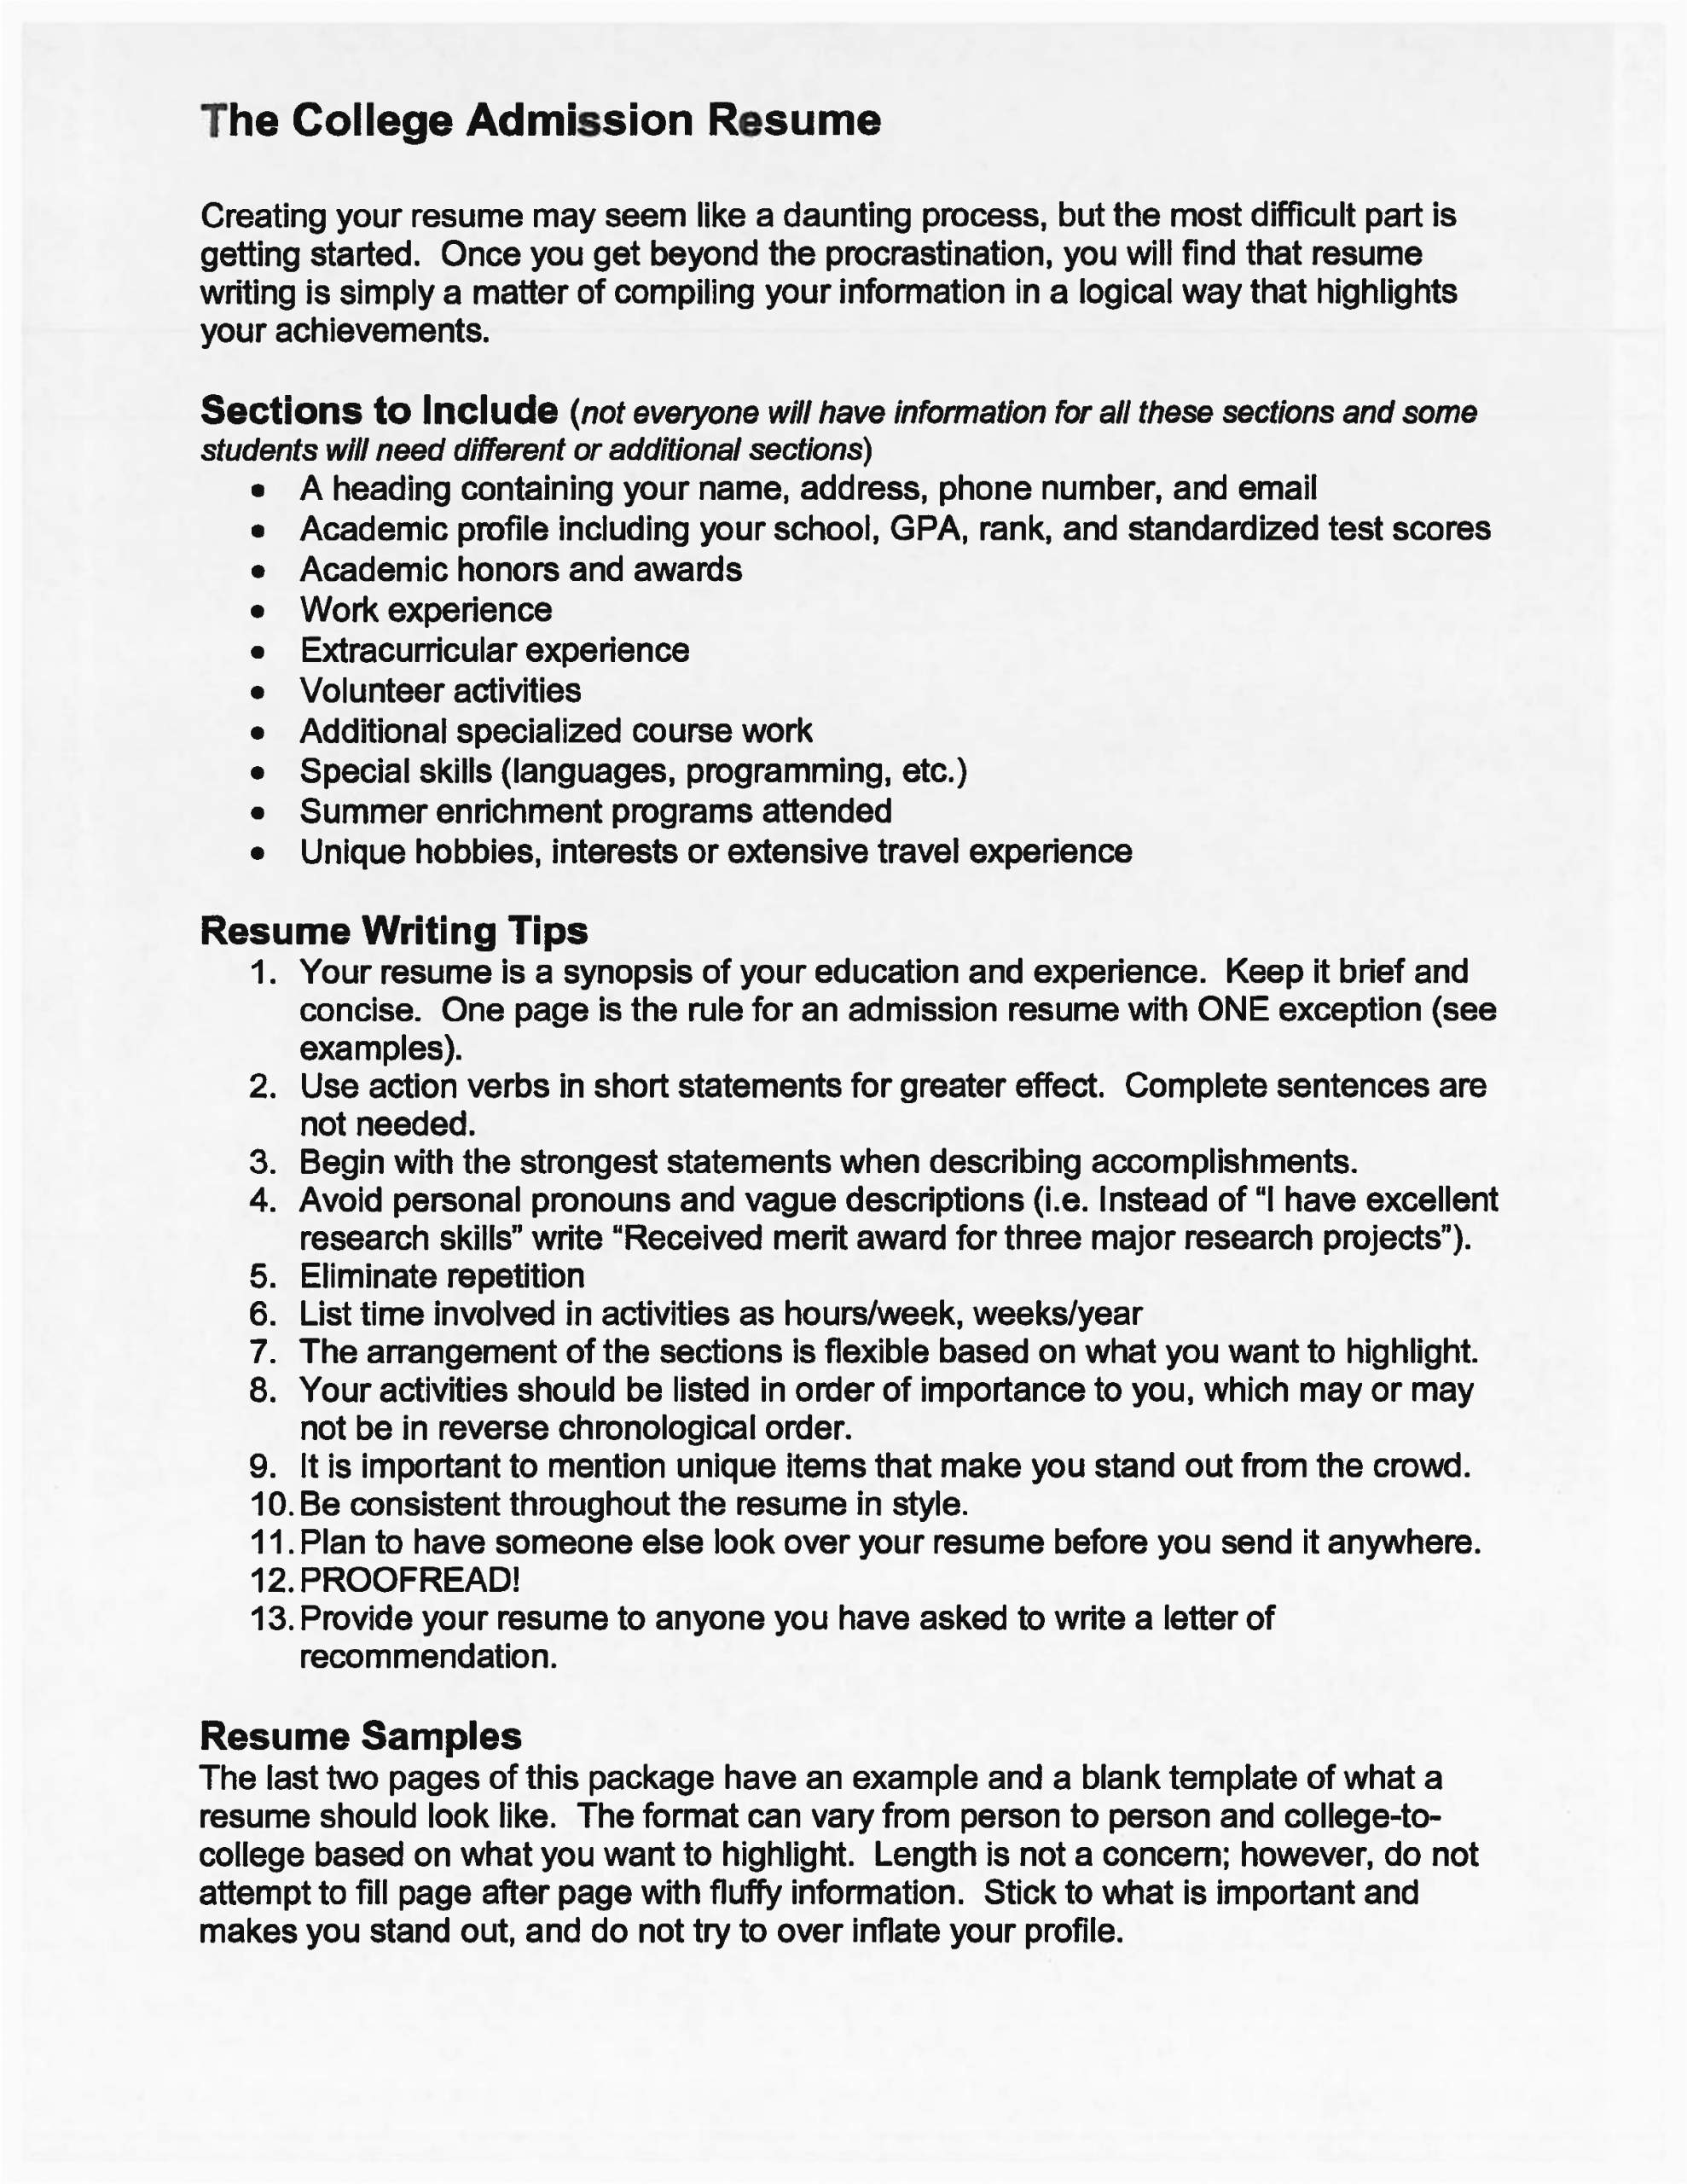 College Admission Sample Resume for College Application the College Admission Resume Free Download